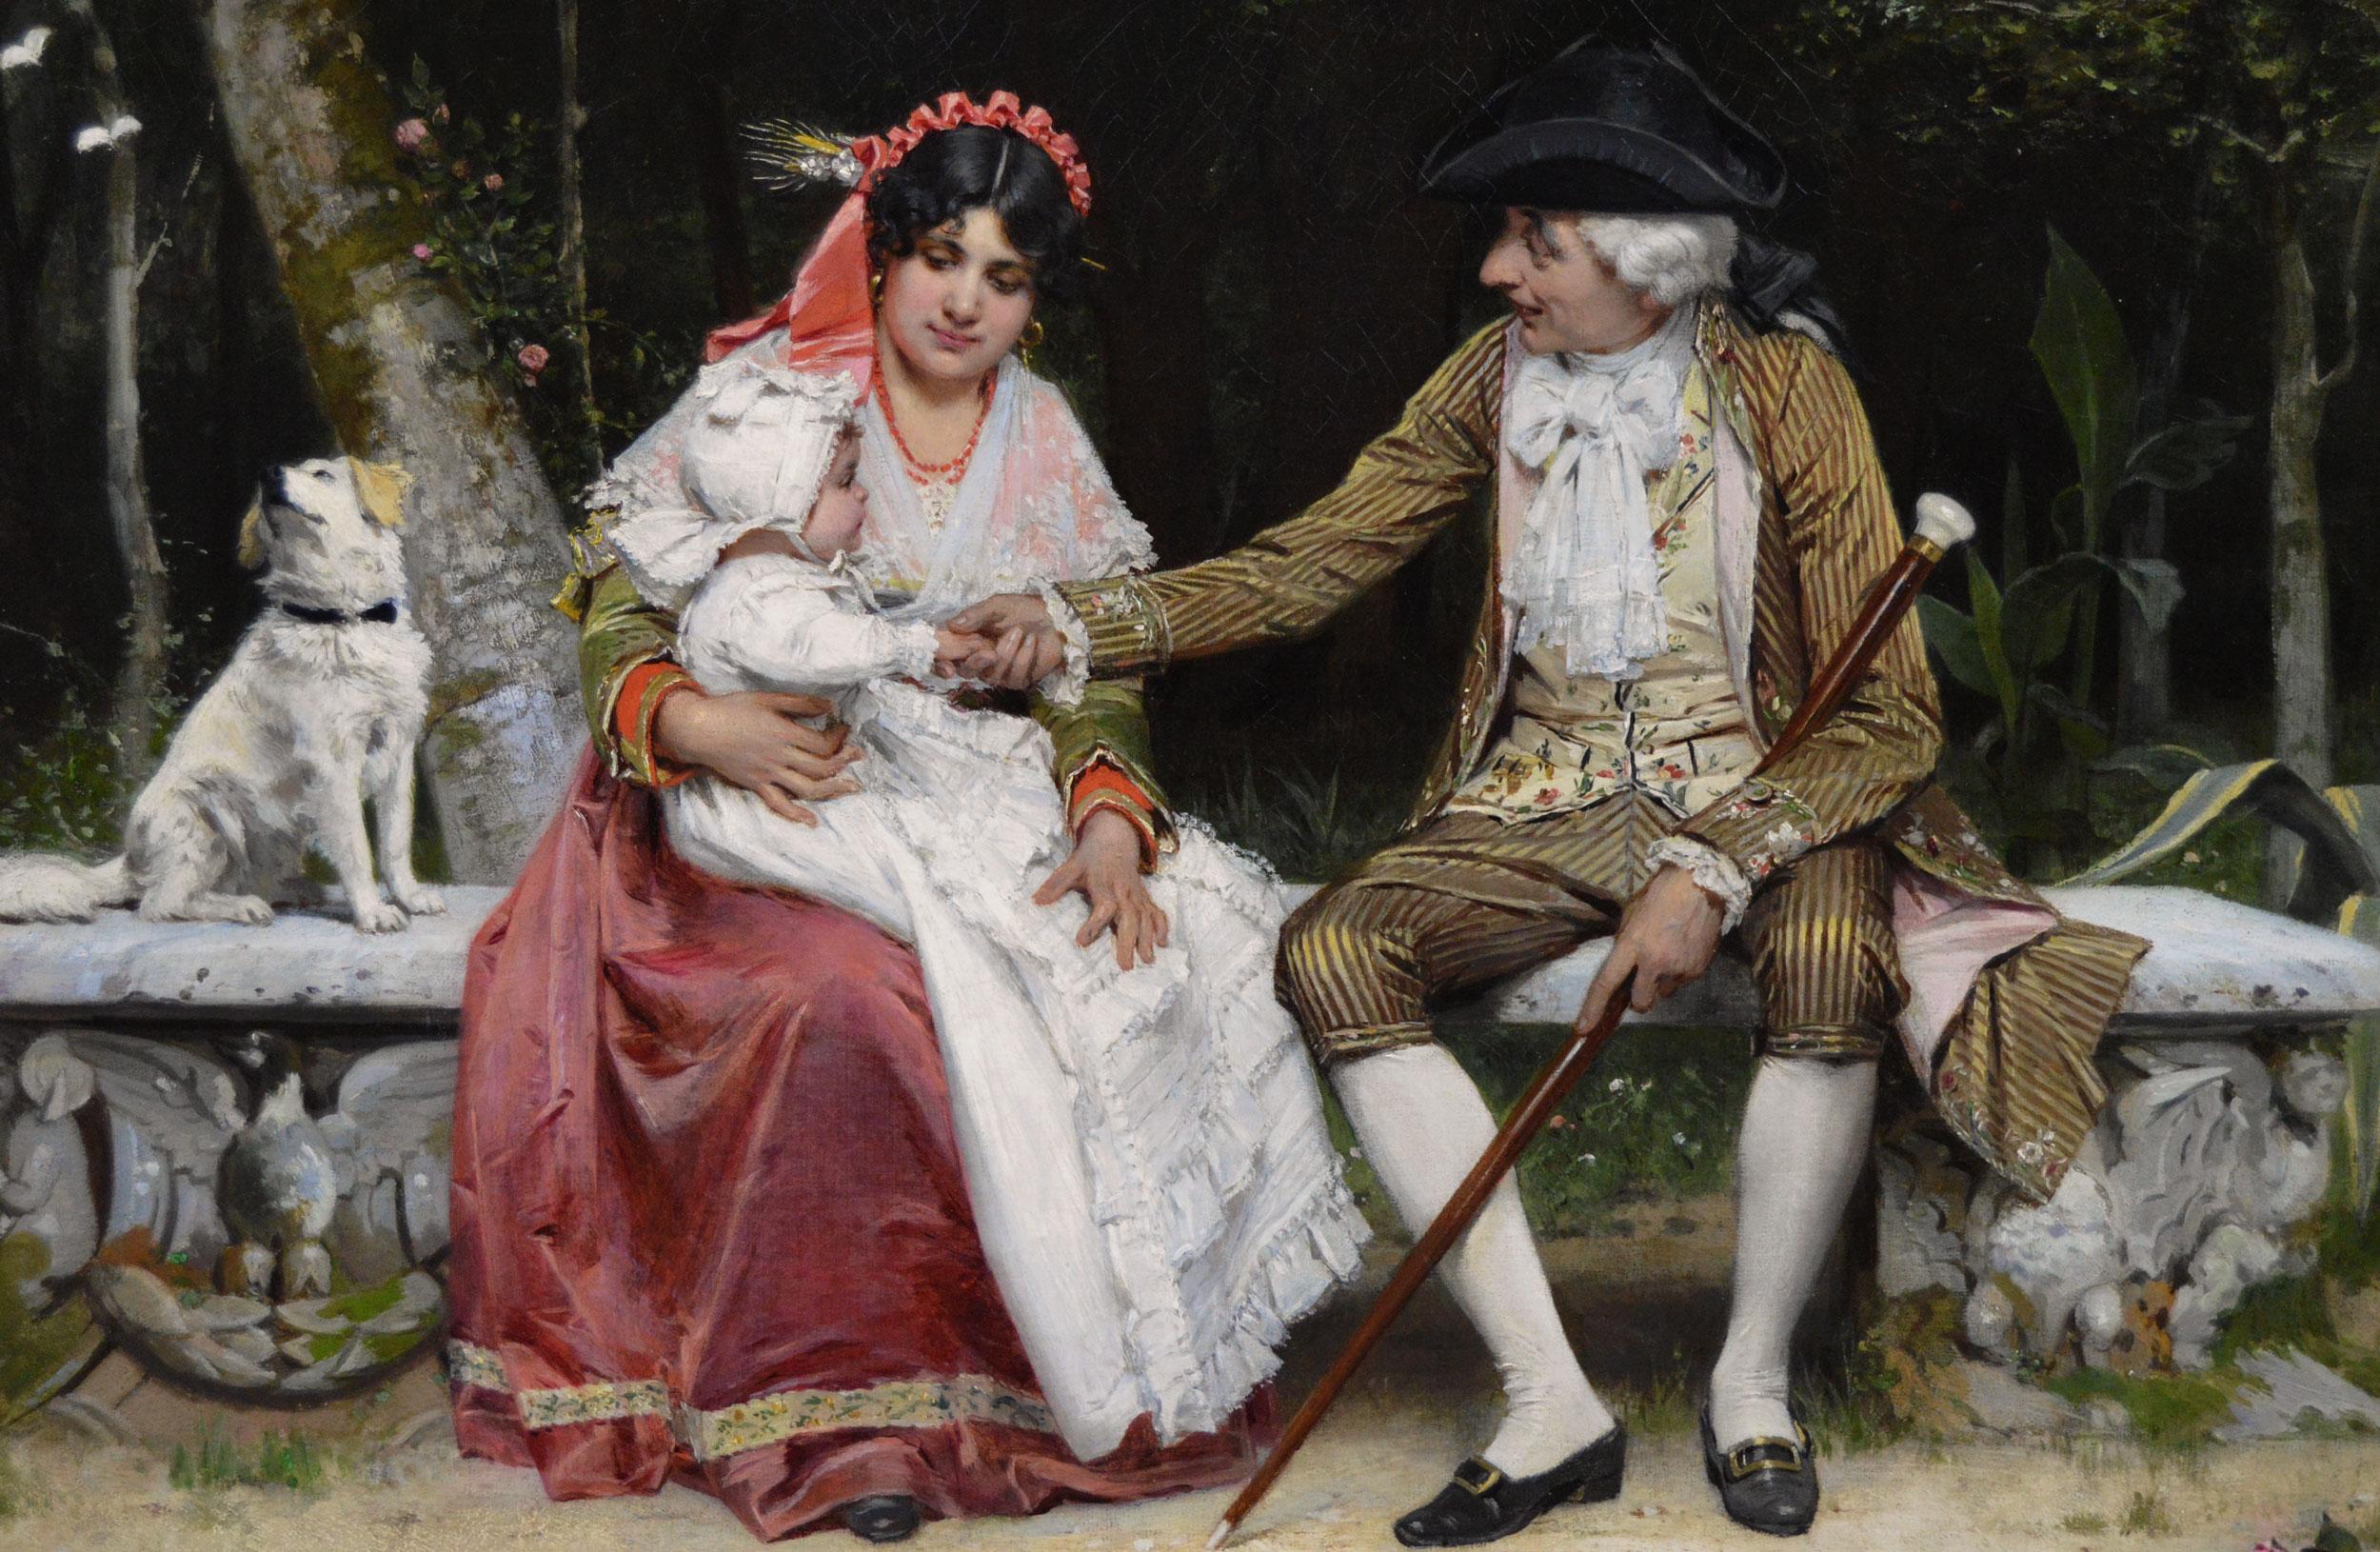 19th Century historical Italian genre scene of a woman & baby sat next to a man - Victorian Painting by Willem Johannes Martens